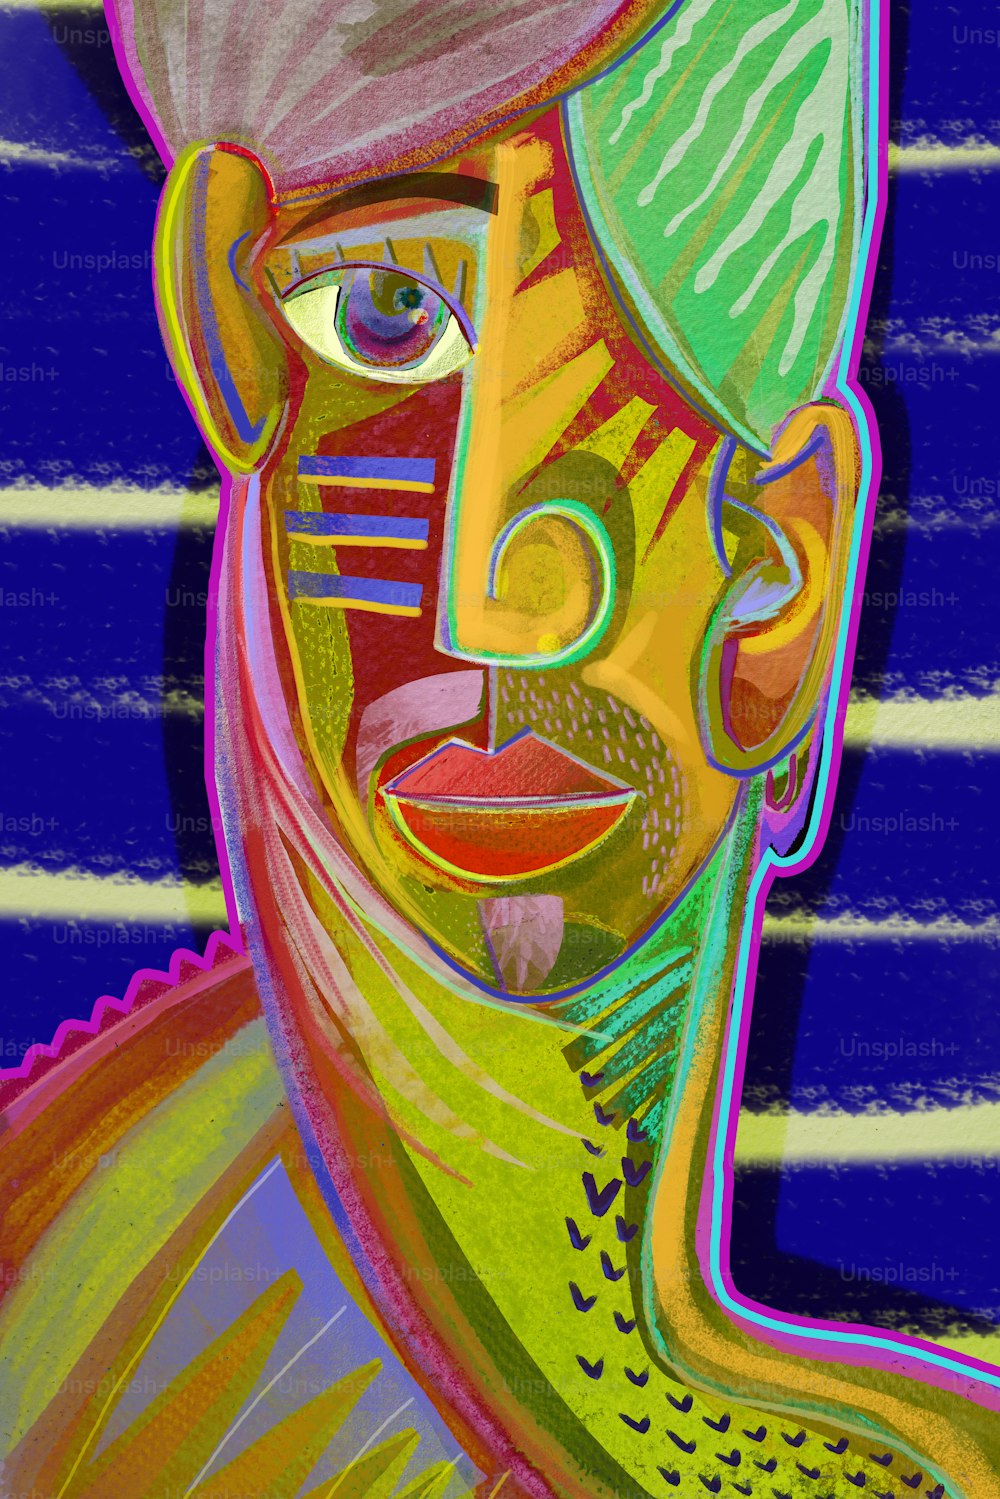 Metaverse Colorful Cubism Art. Portrait of a thinking man drawn in cubist style